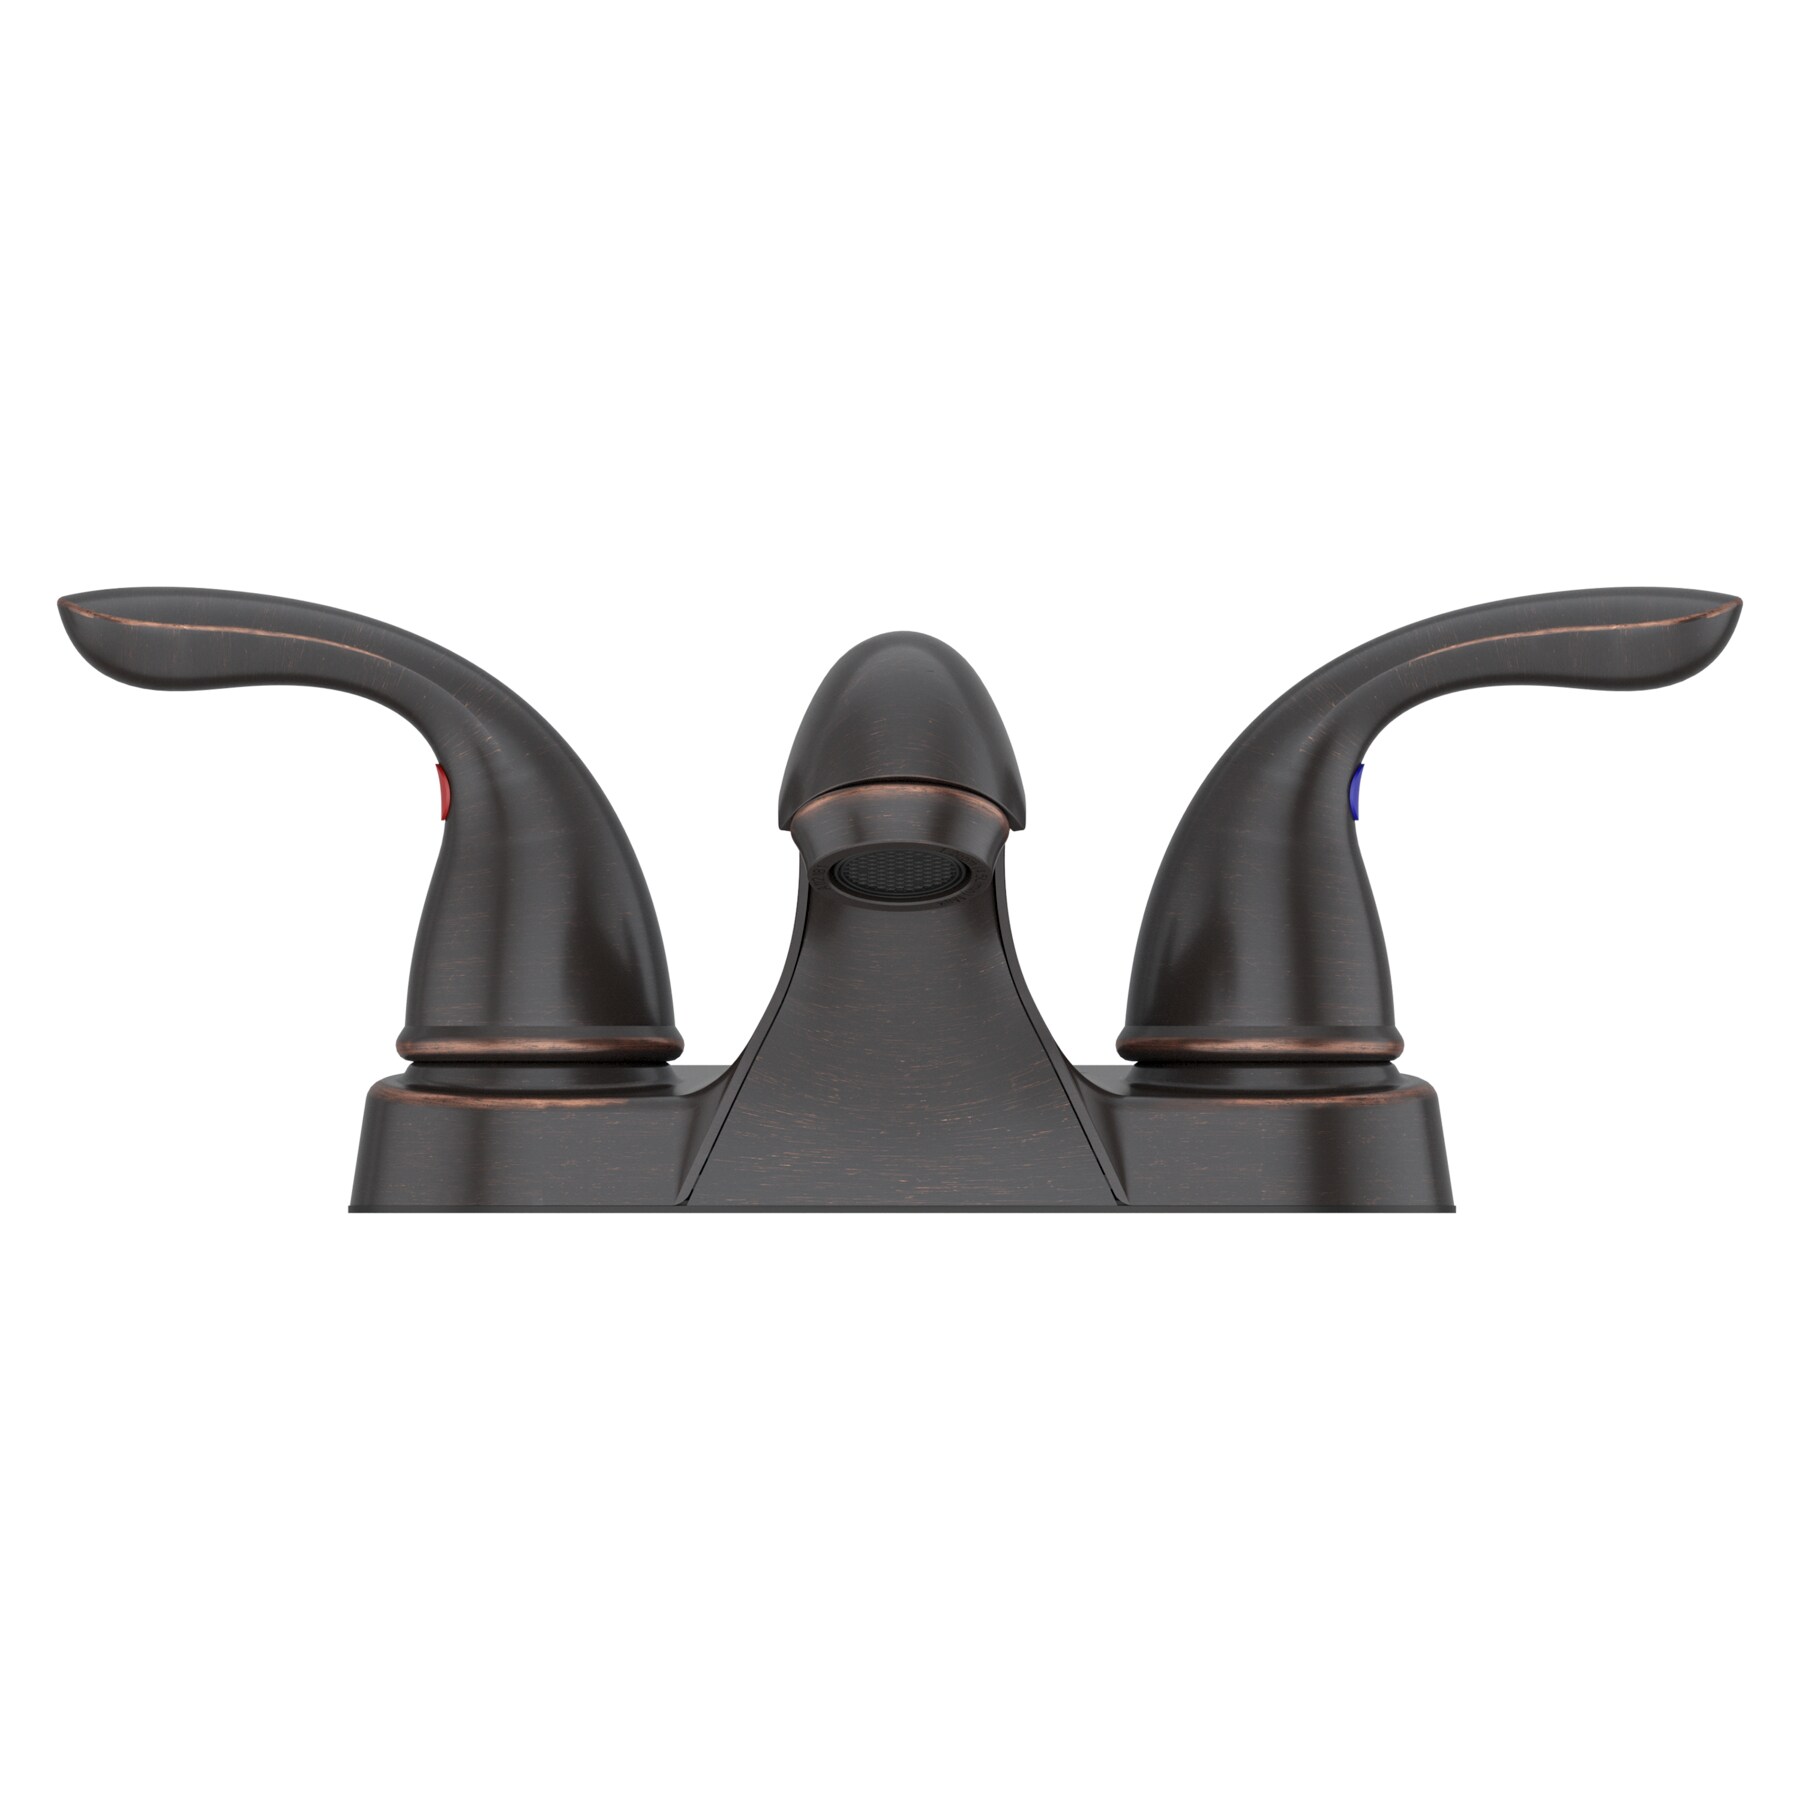 Pfister Pfirst Tuscan Bronze 2-handle 4-in centerset WaterSense Low-arc Bathroom Sink Faucet with Drain